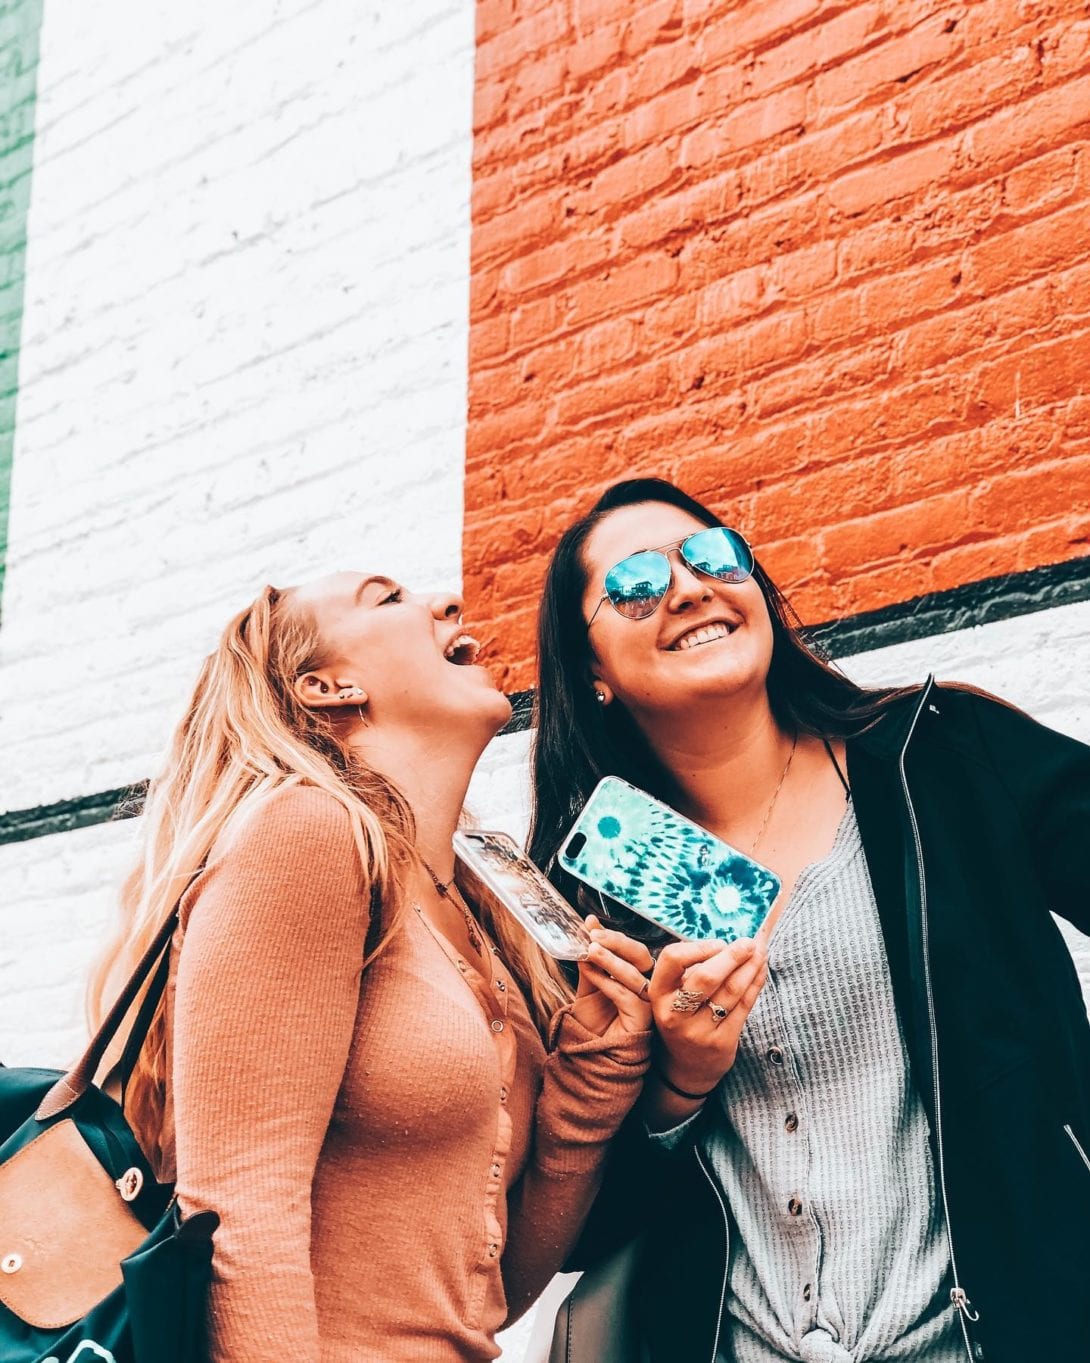 missing georgetown  only 3 months till we’re back in D.C. - get this adorable summer case (yin yang tie dye) on WWW.CASESBYKATE.COM •
•
•
•
•
•
•